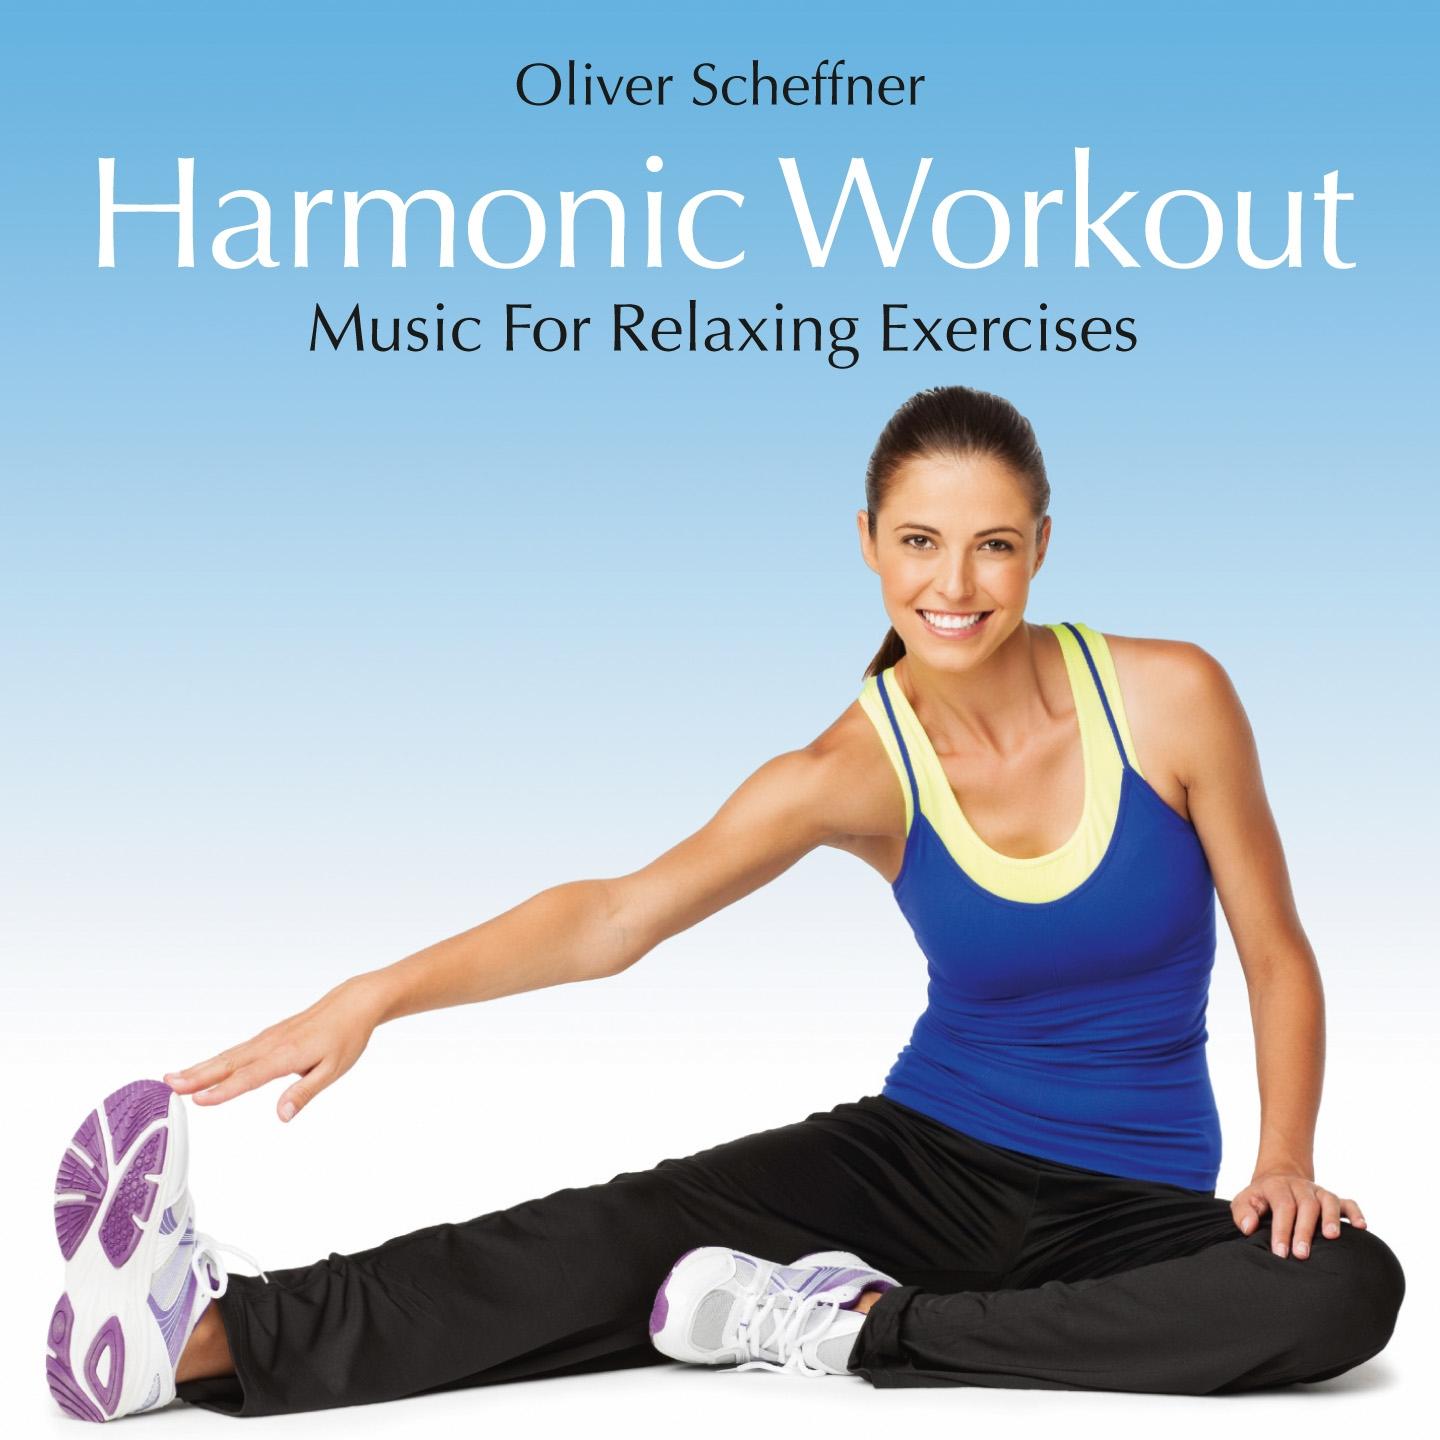 Harmonic Workout: Music for Relaxing Exercises